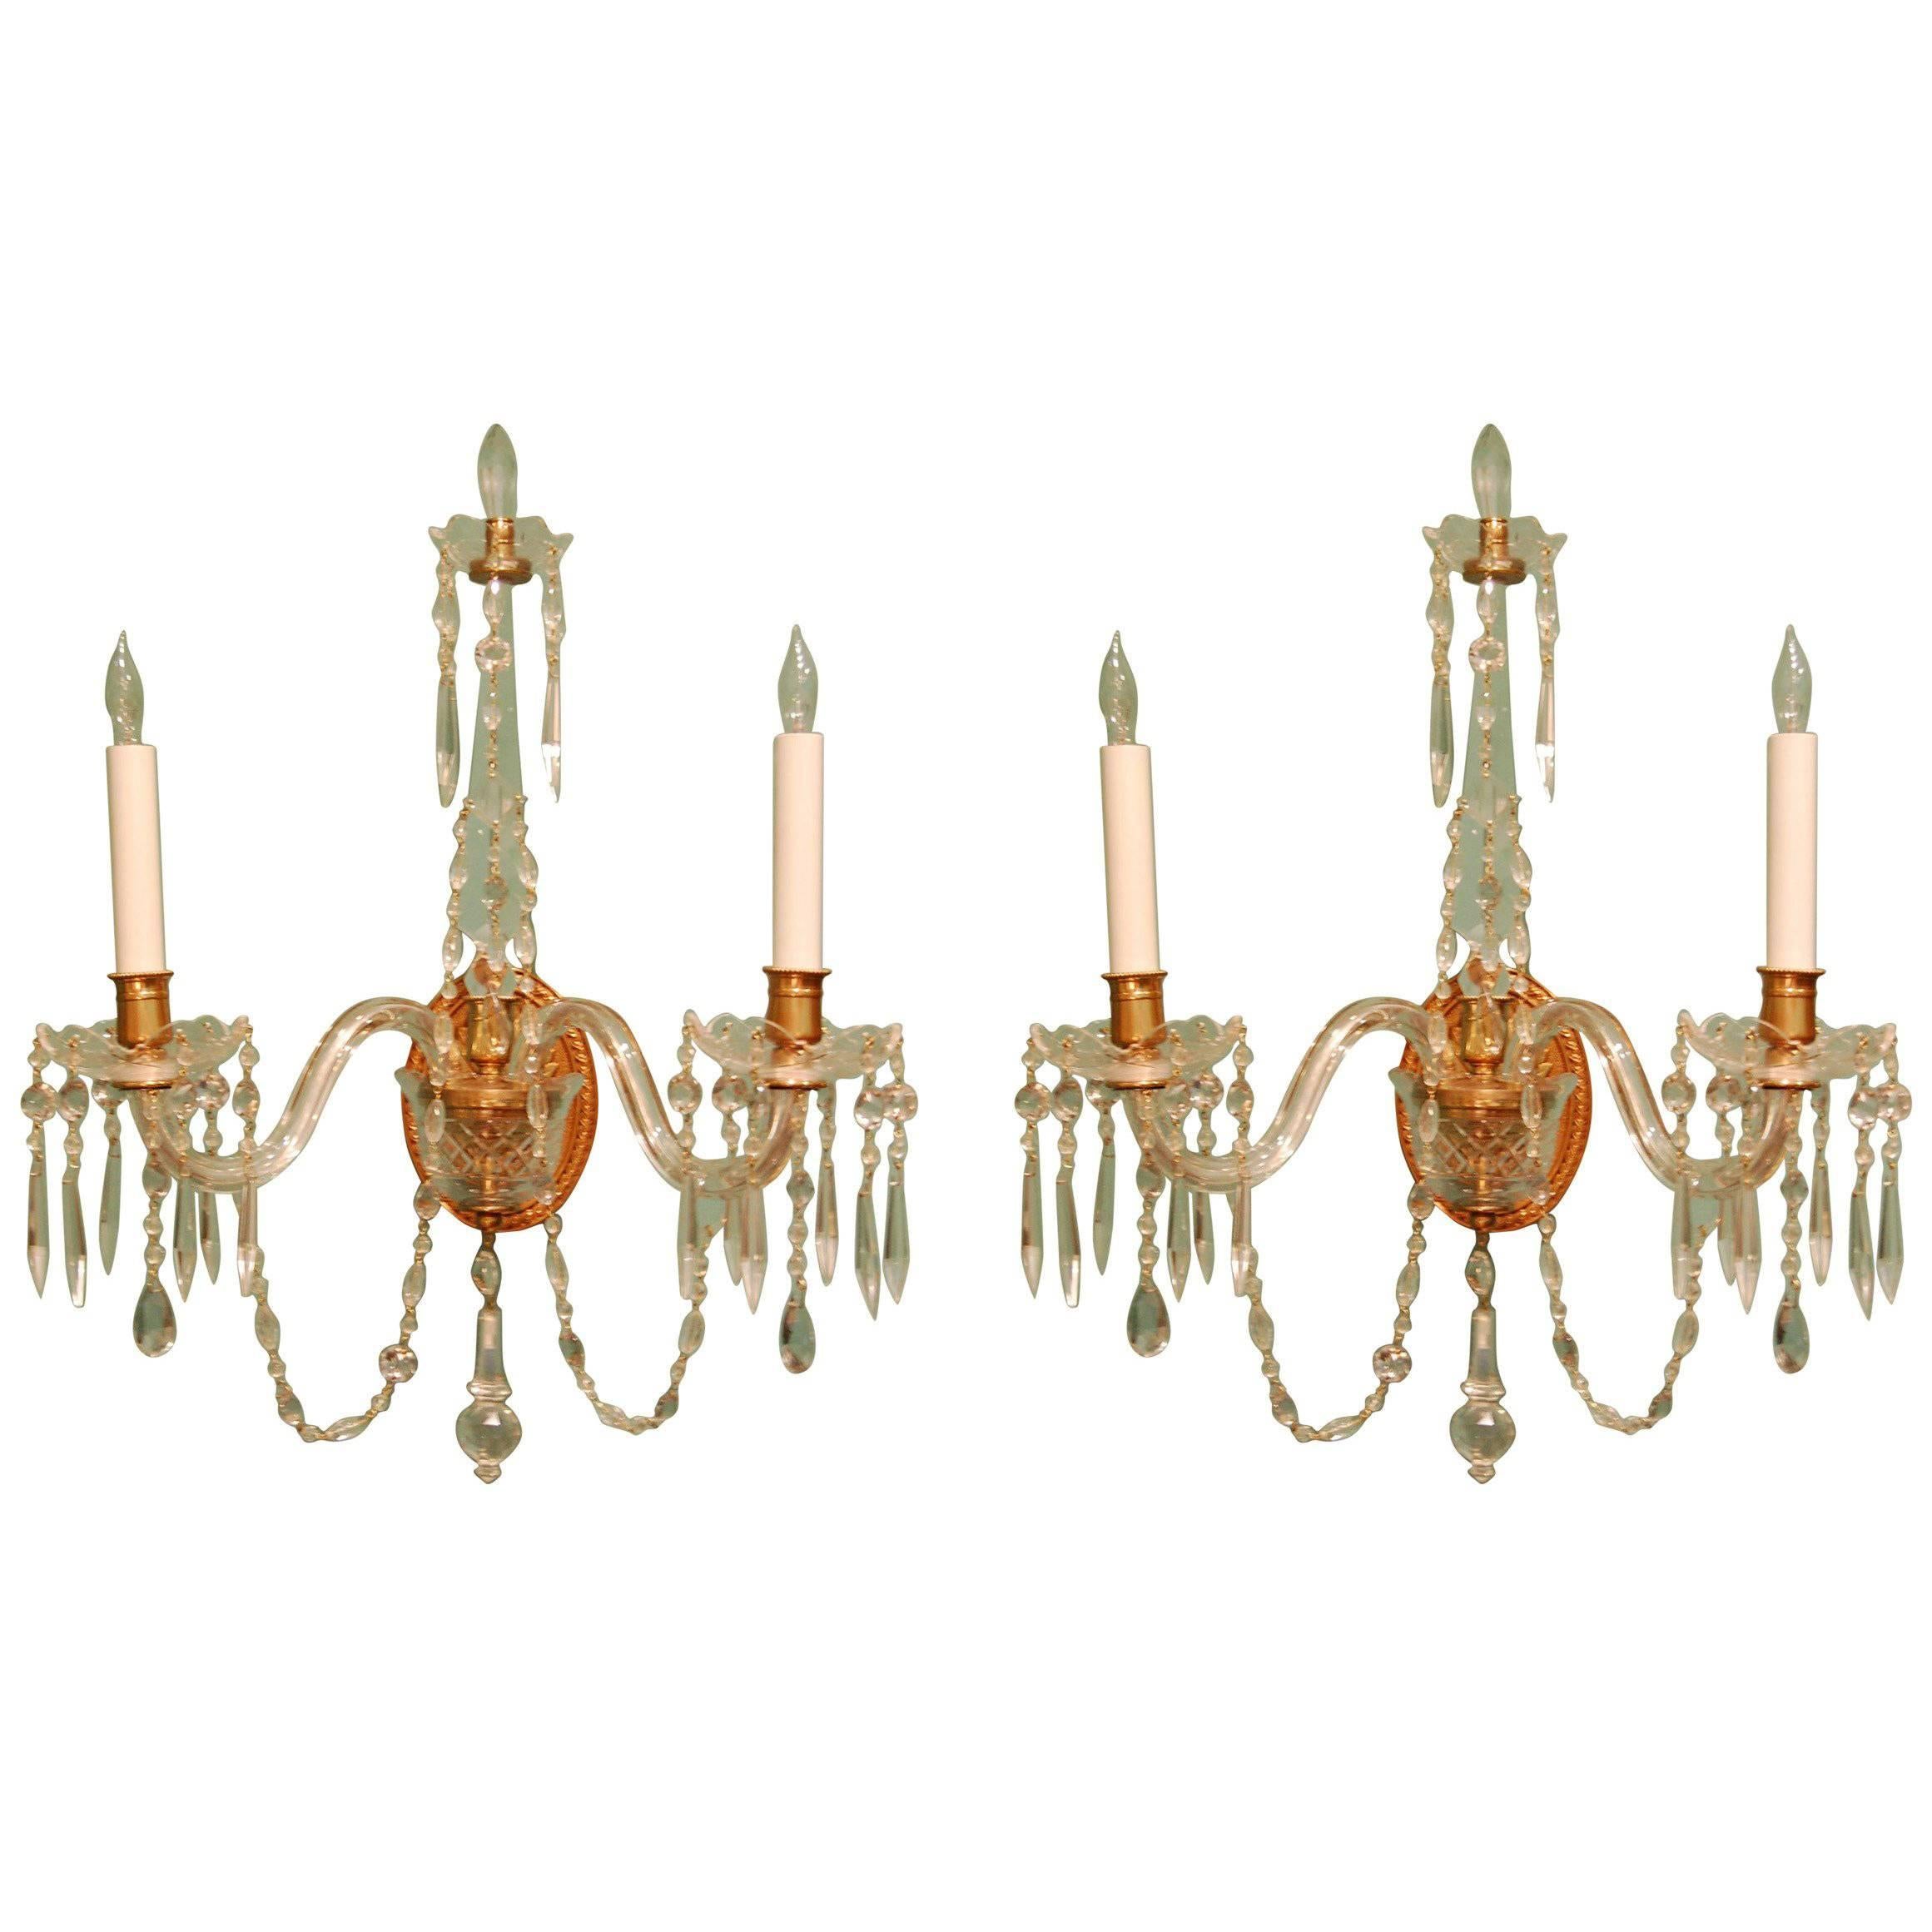 Pair of Crystal Two-Light Wall Sconces with Crystal Drops, Waterford Type, 1920s